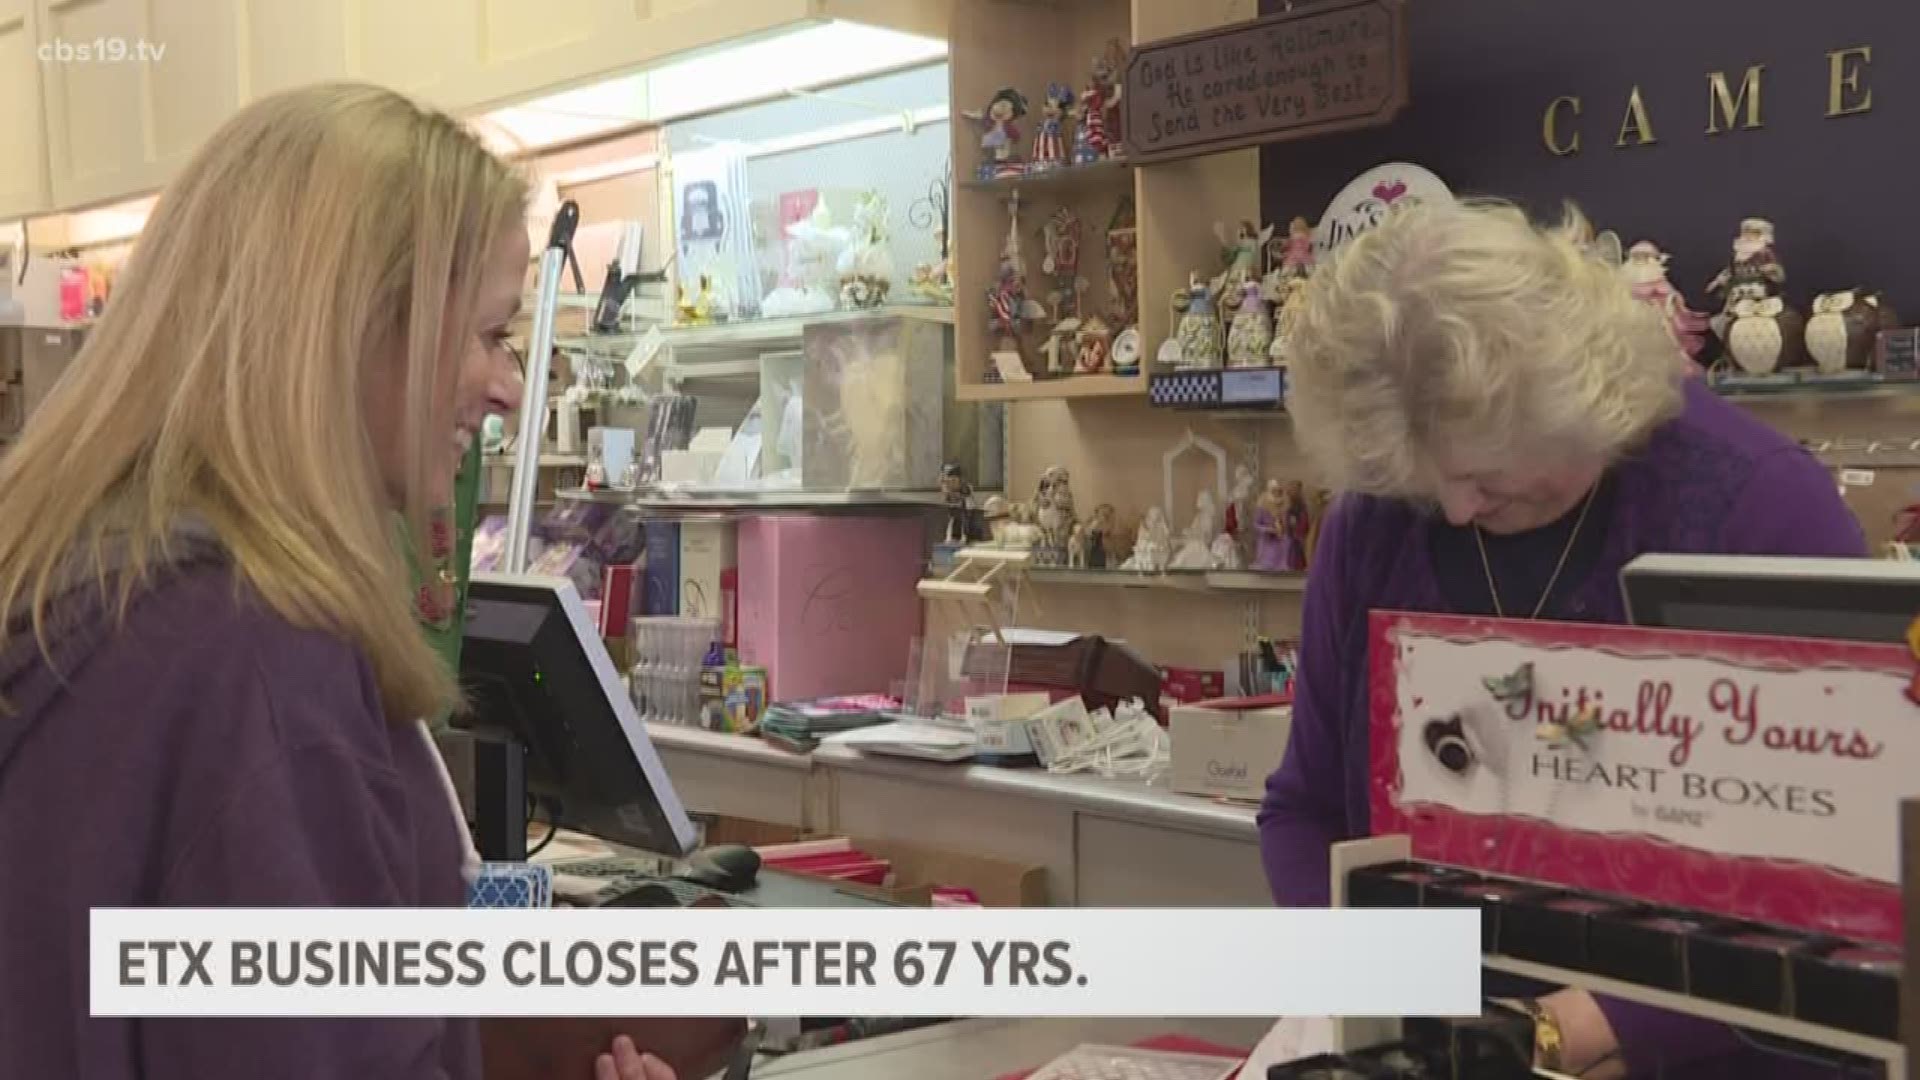 Hallmark Camera Shop in Longview has been open for more than half a decade, and it's now closing its doors.